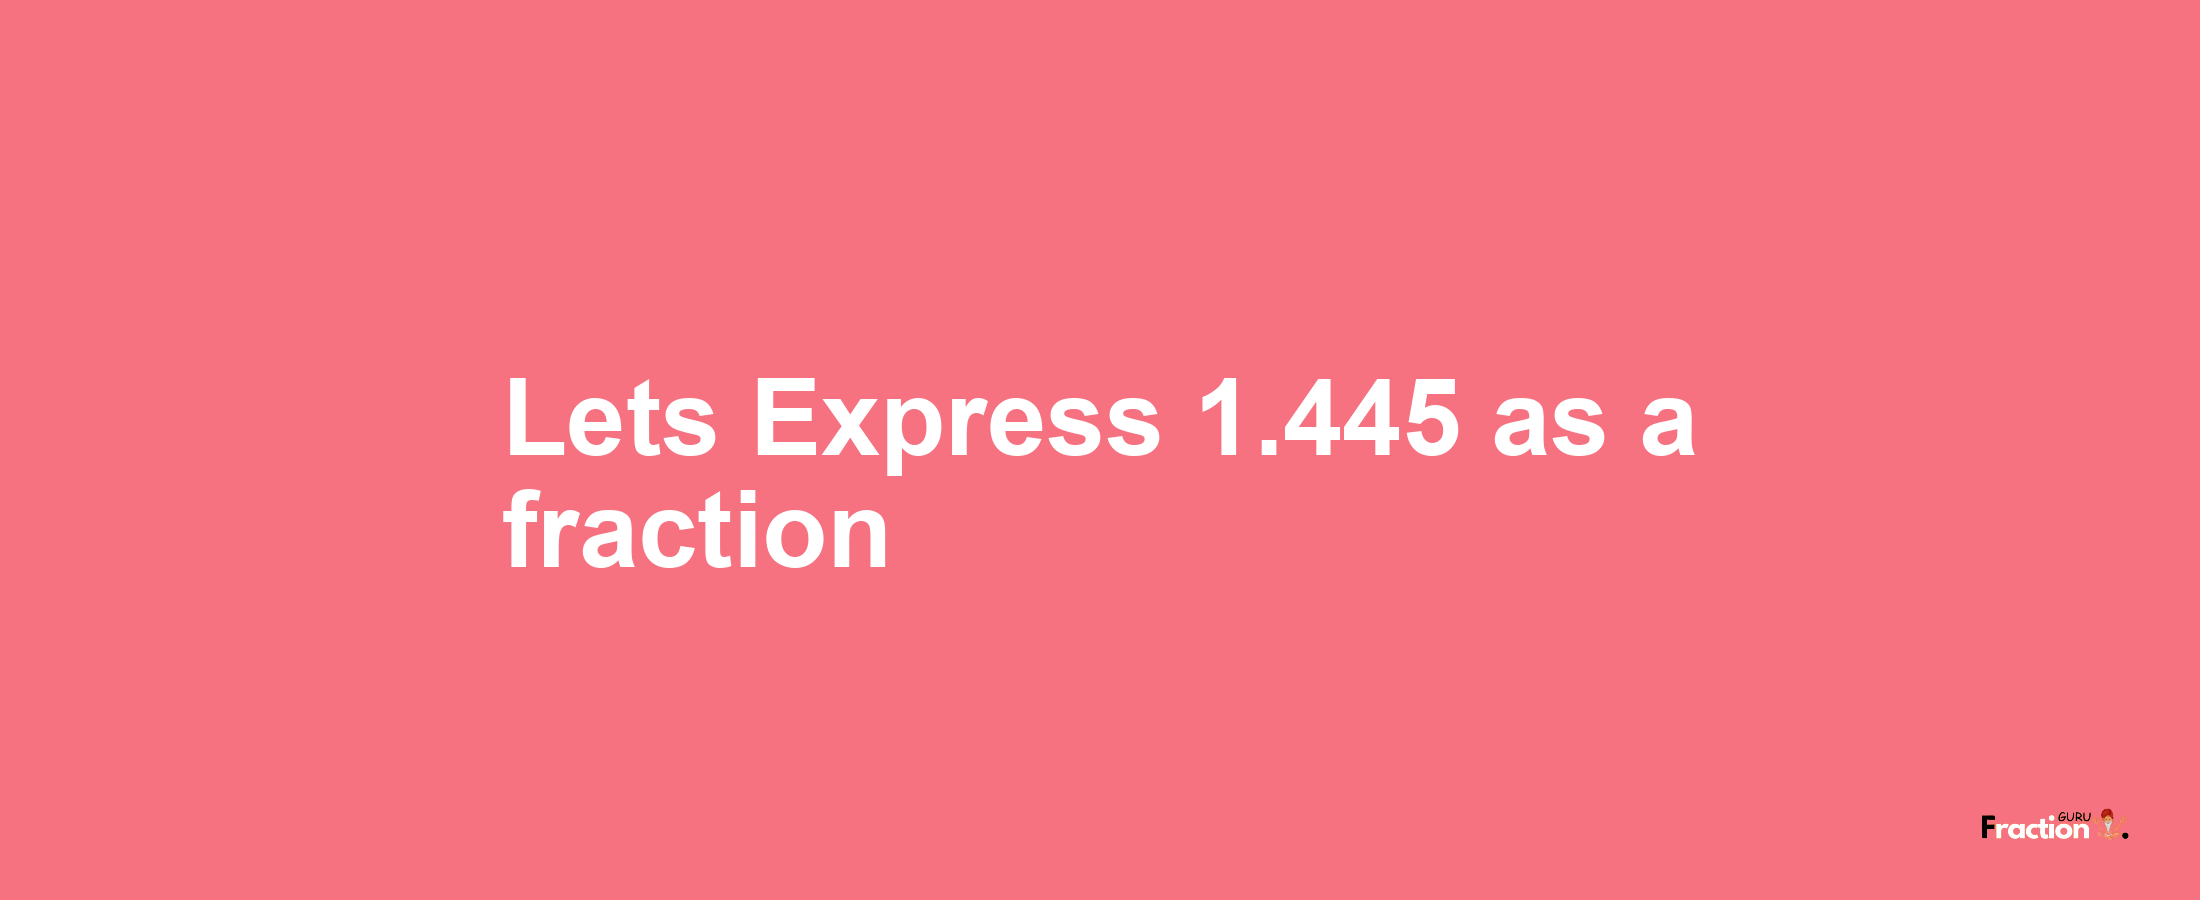 Lets Express 1.445 as afraction